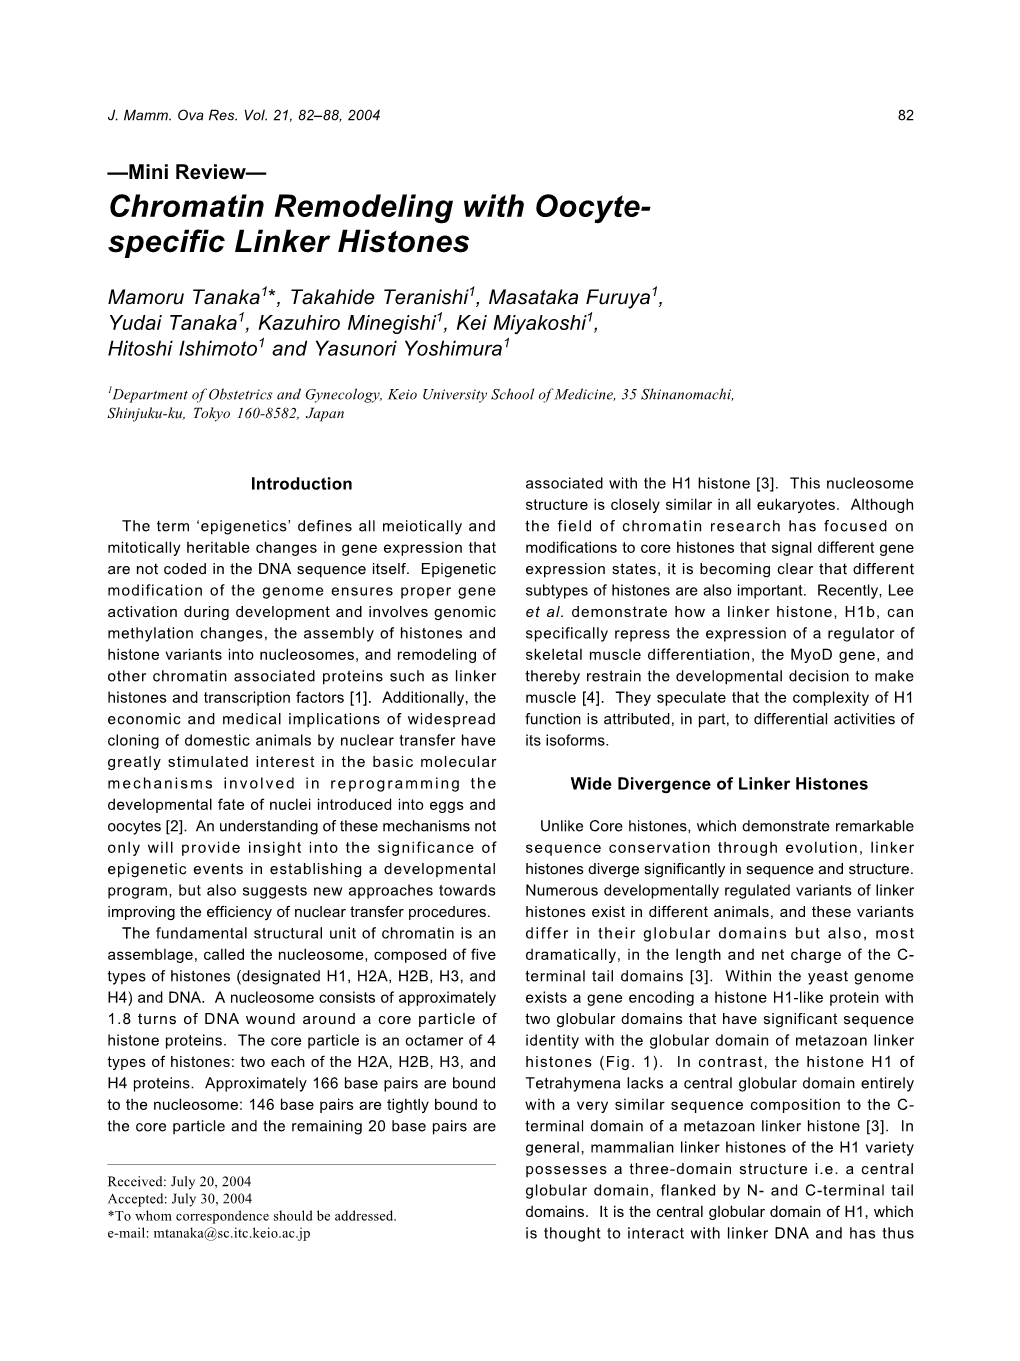 Chromatin Remodeling with Oocyte- Specific Linker Histones